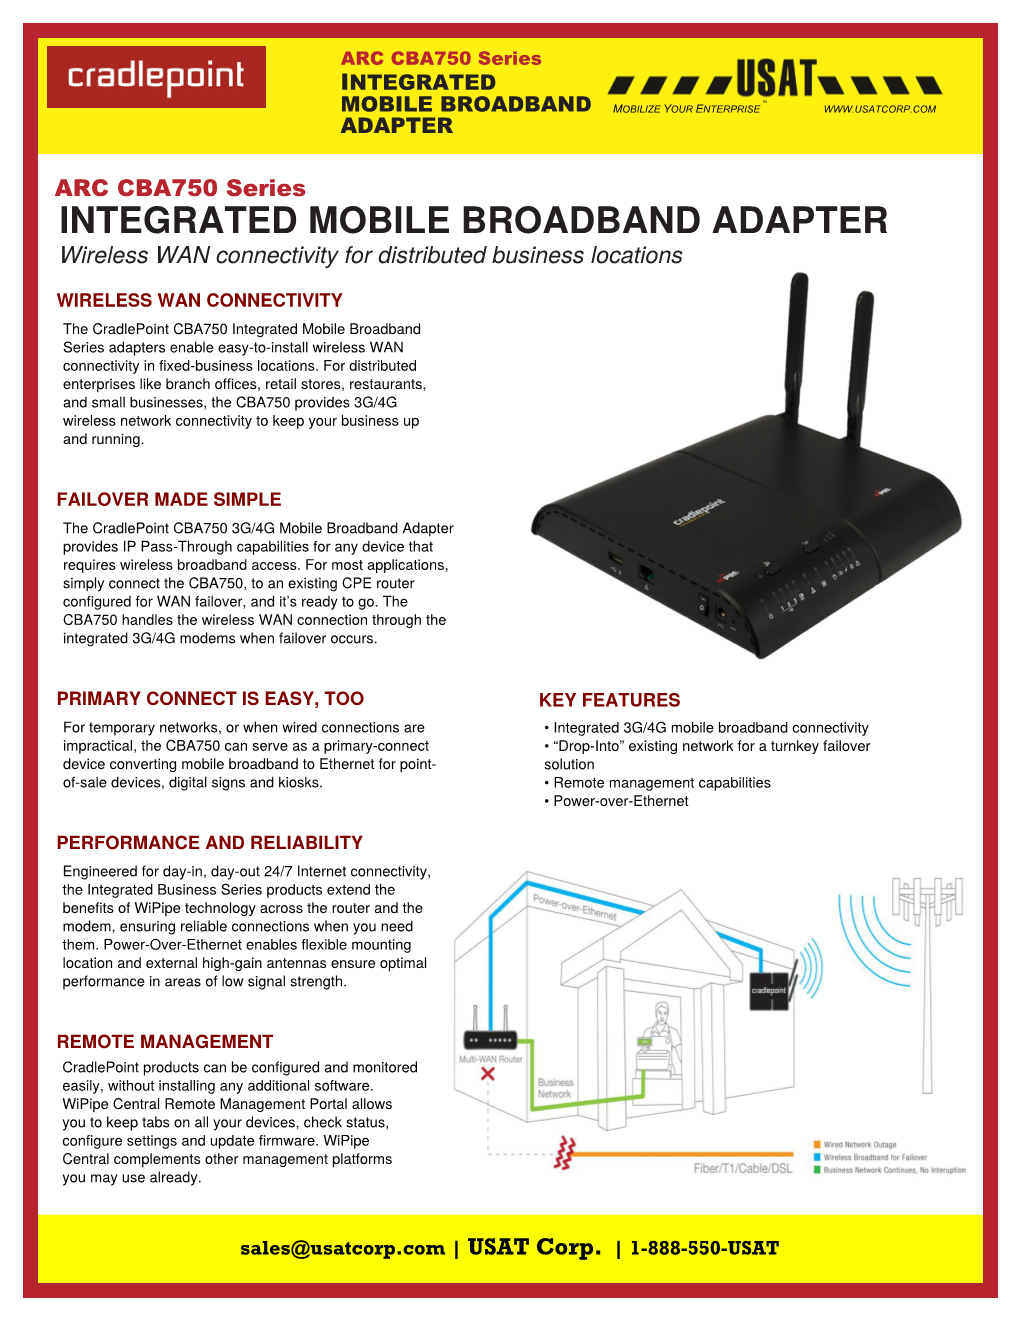 INTEGRATED MOBILE BROADBAND ADAPTER Wireless WAN Connectivity for Distributed Business Locations